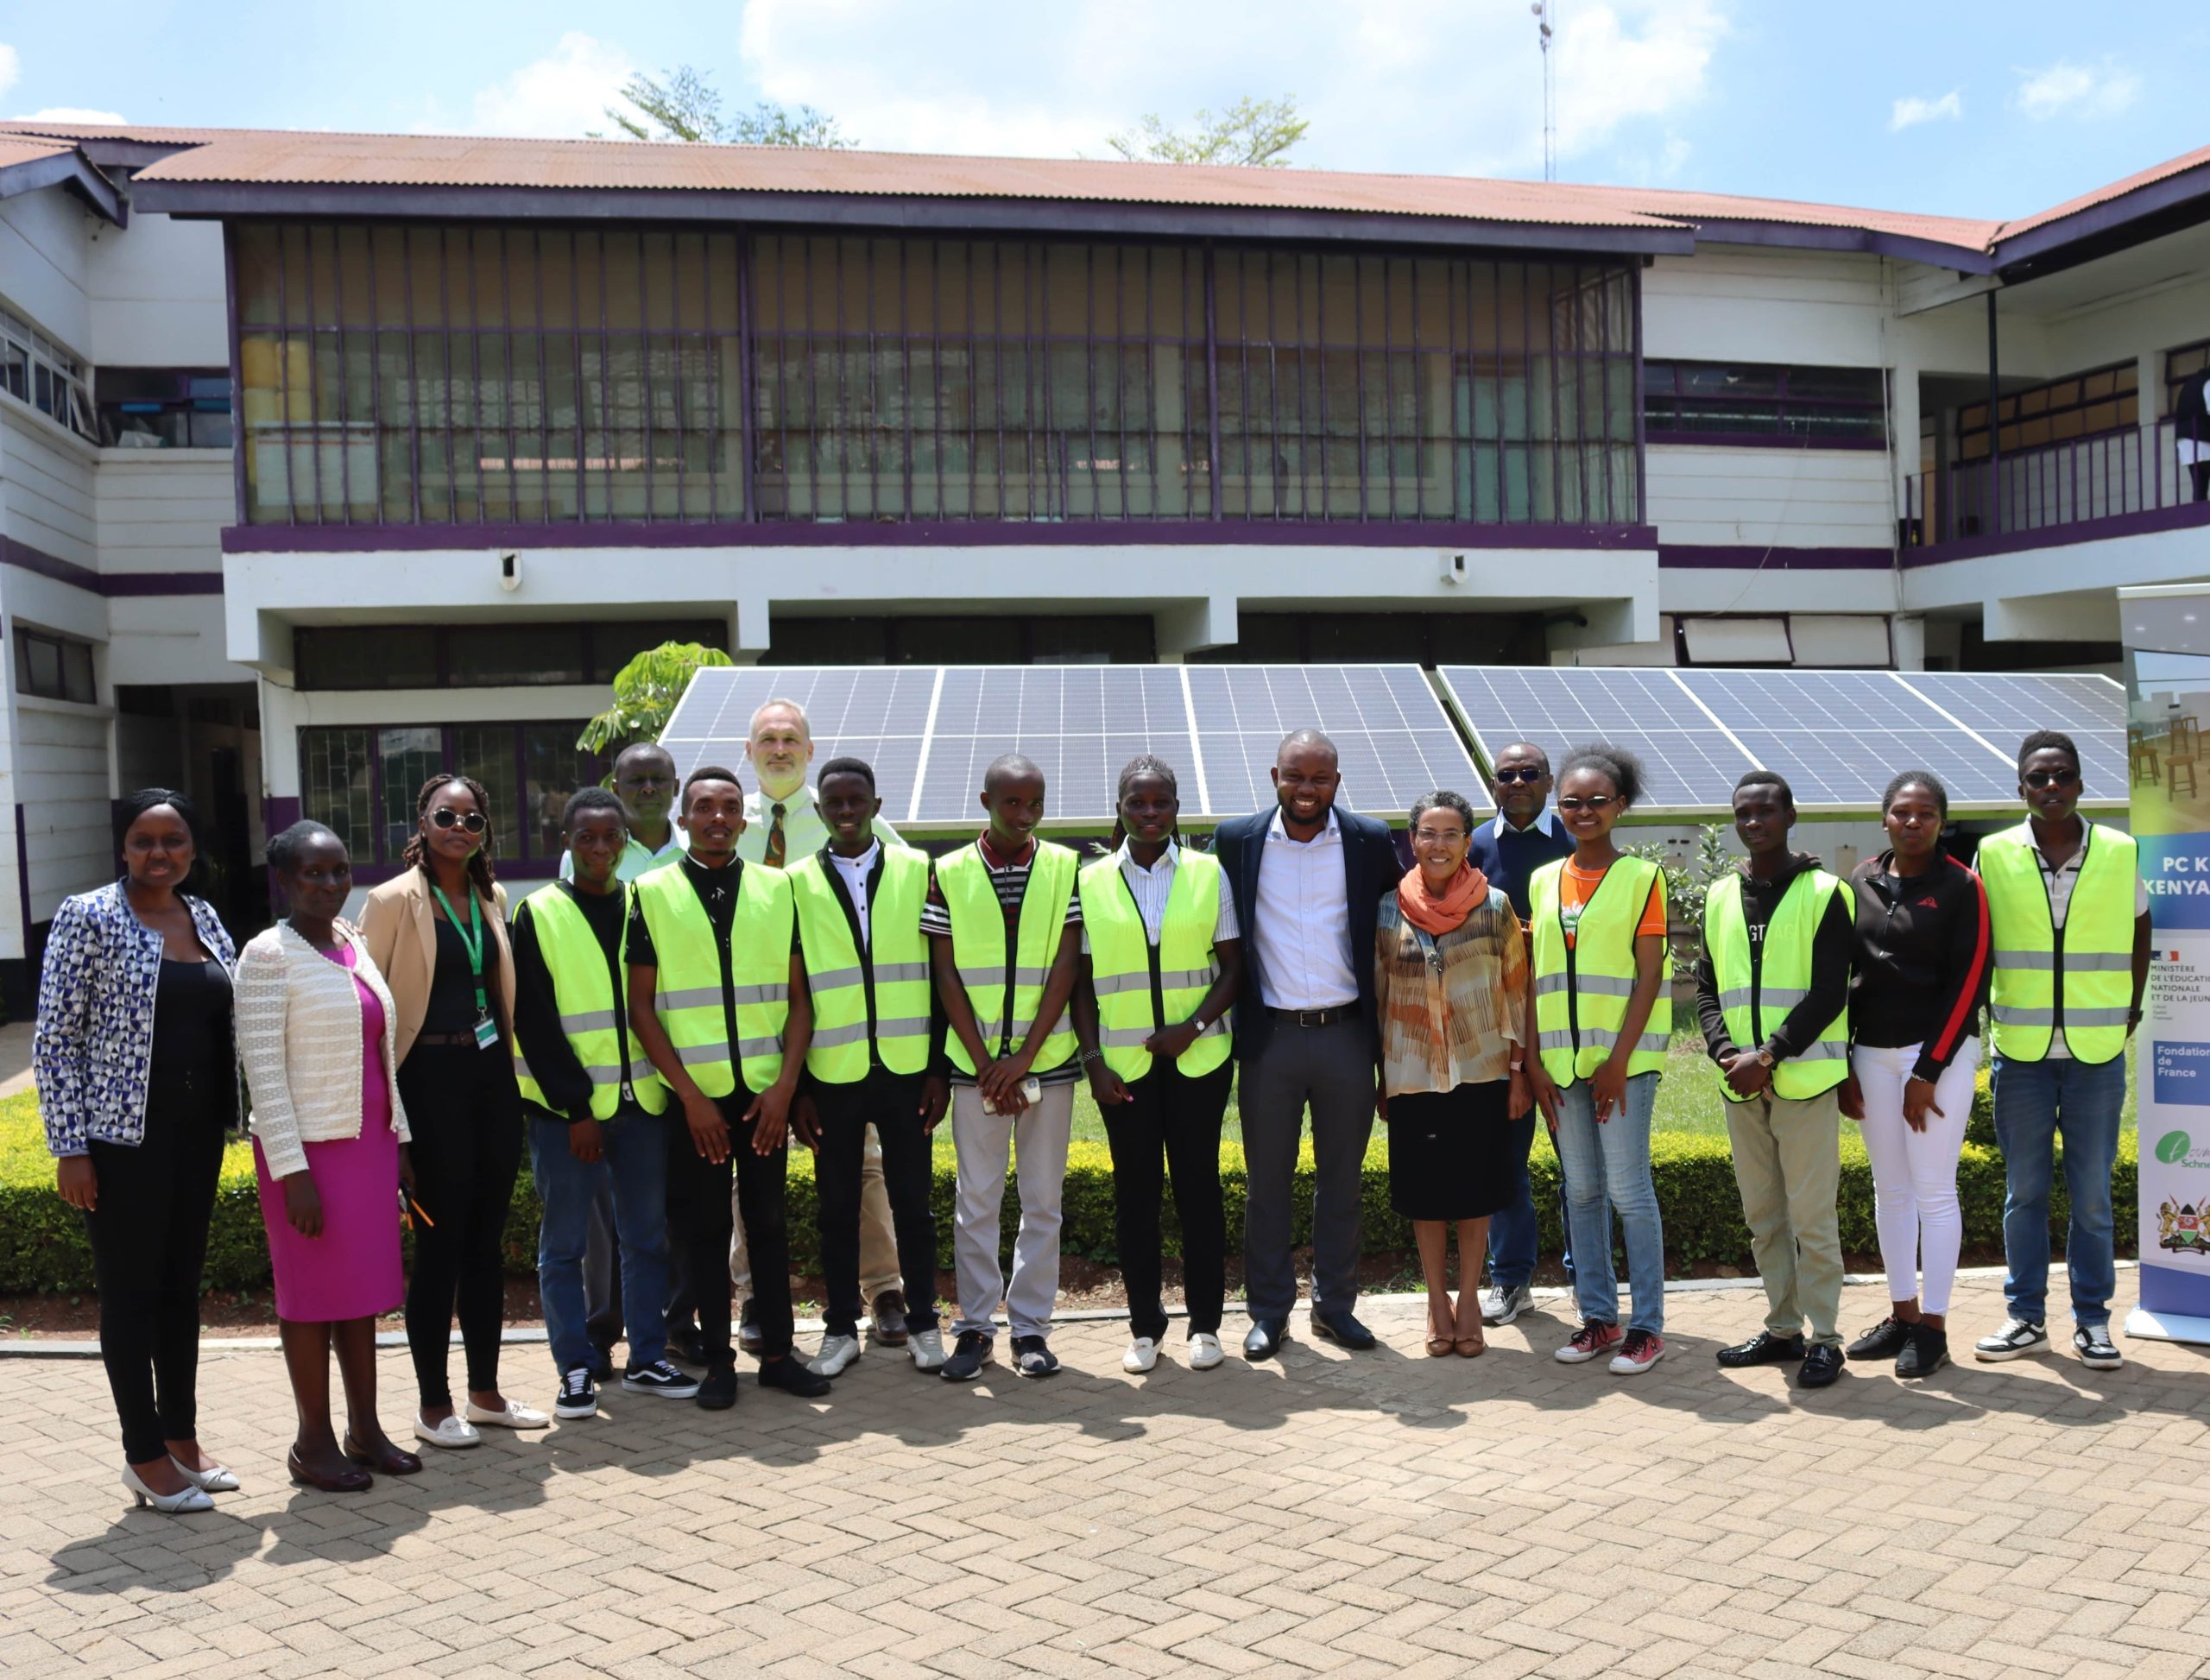 Schneider Electric Kenya has committed to nurture the future leaders of sustainable energy through the Scholar Grid Challenge initiative.